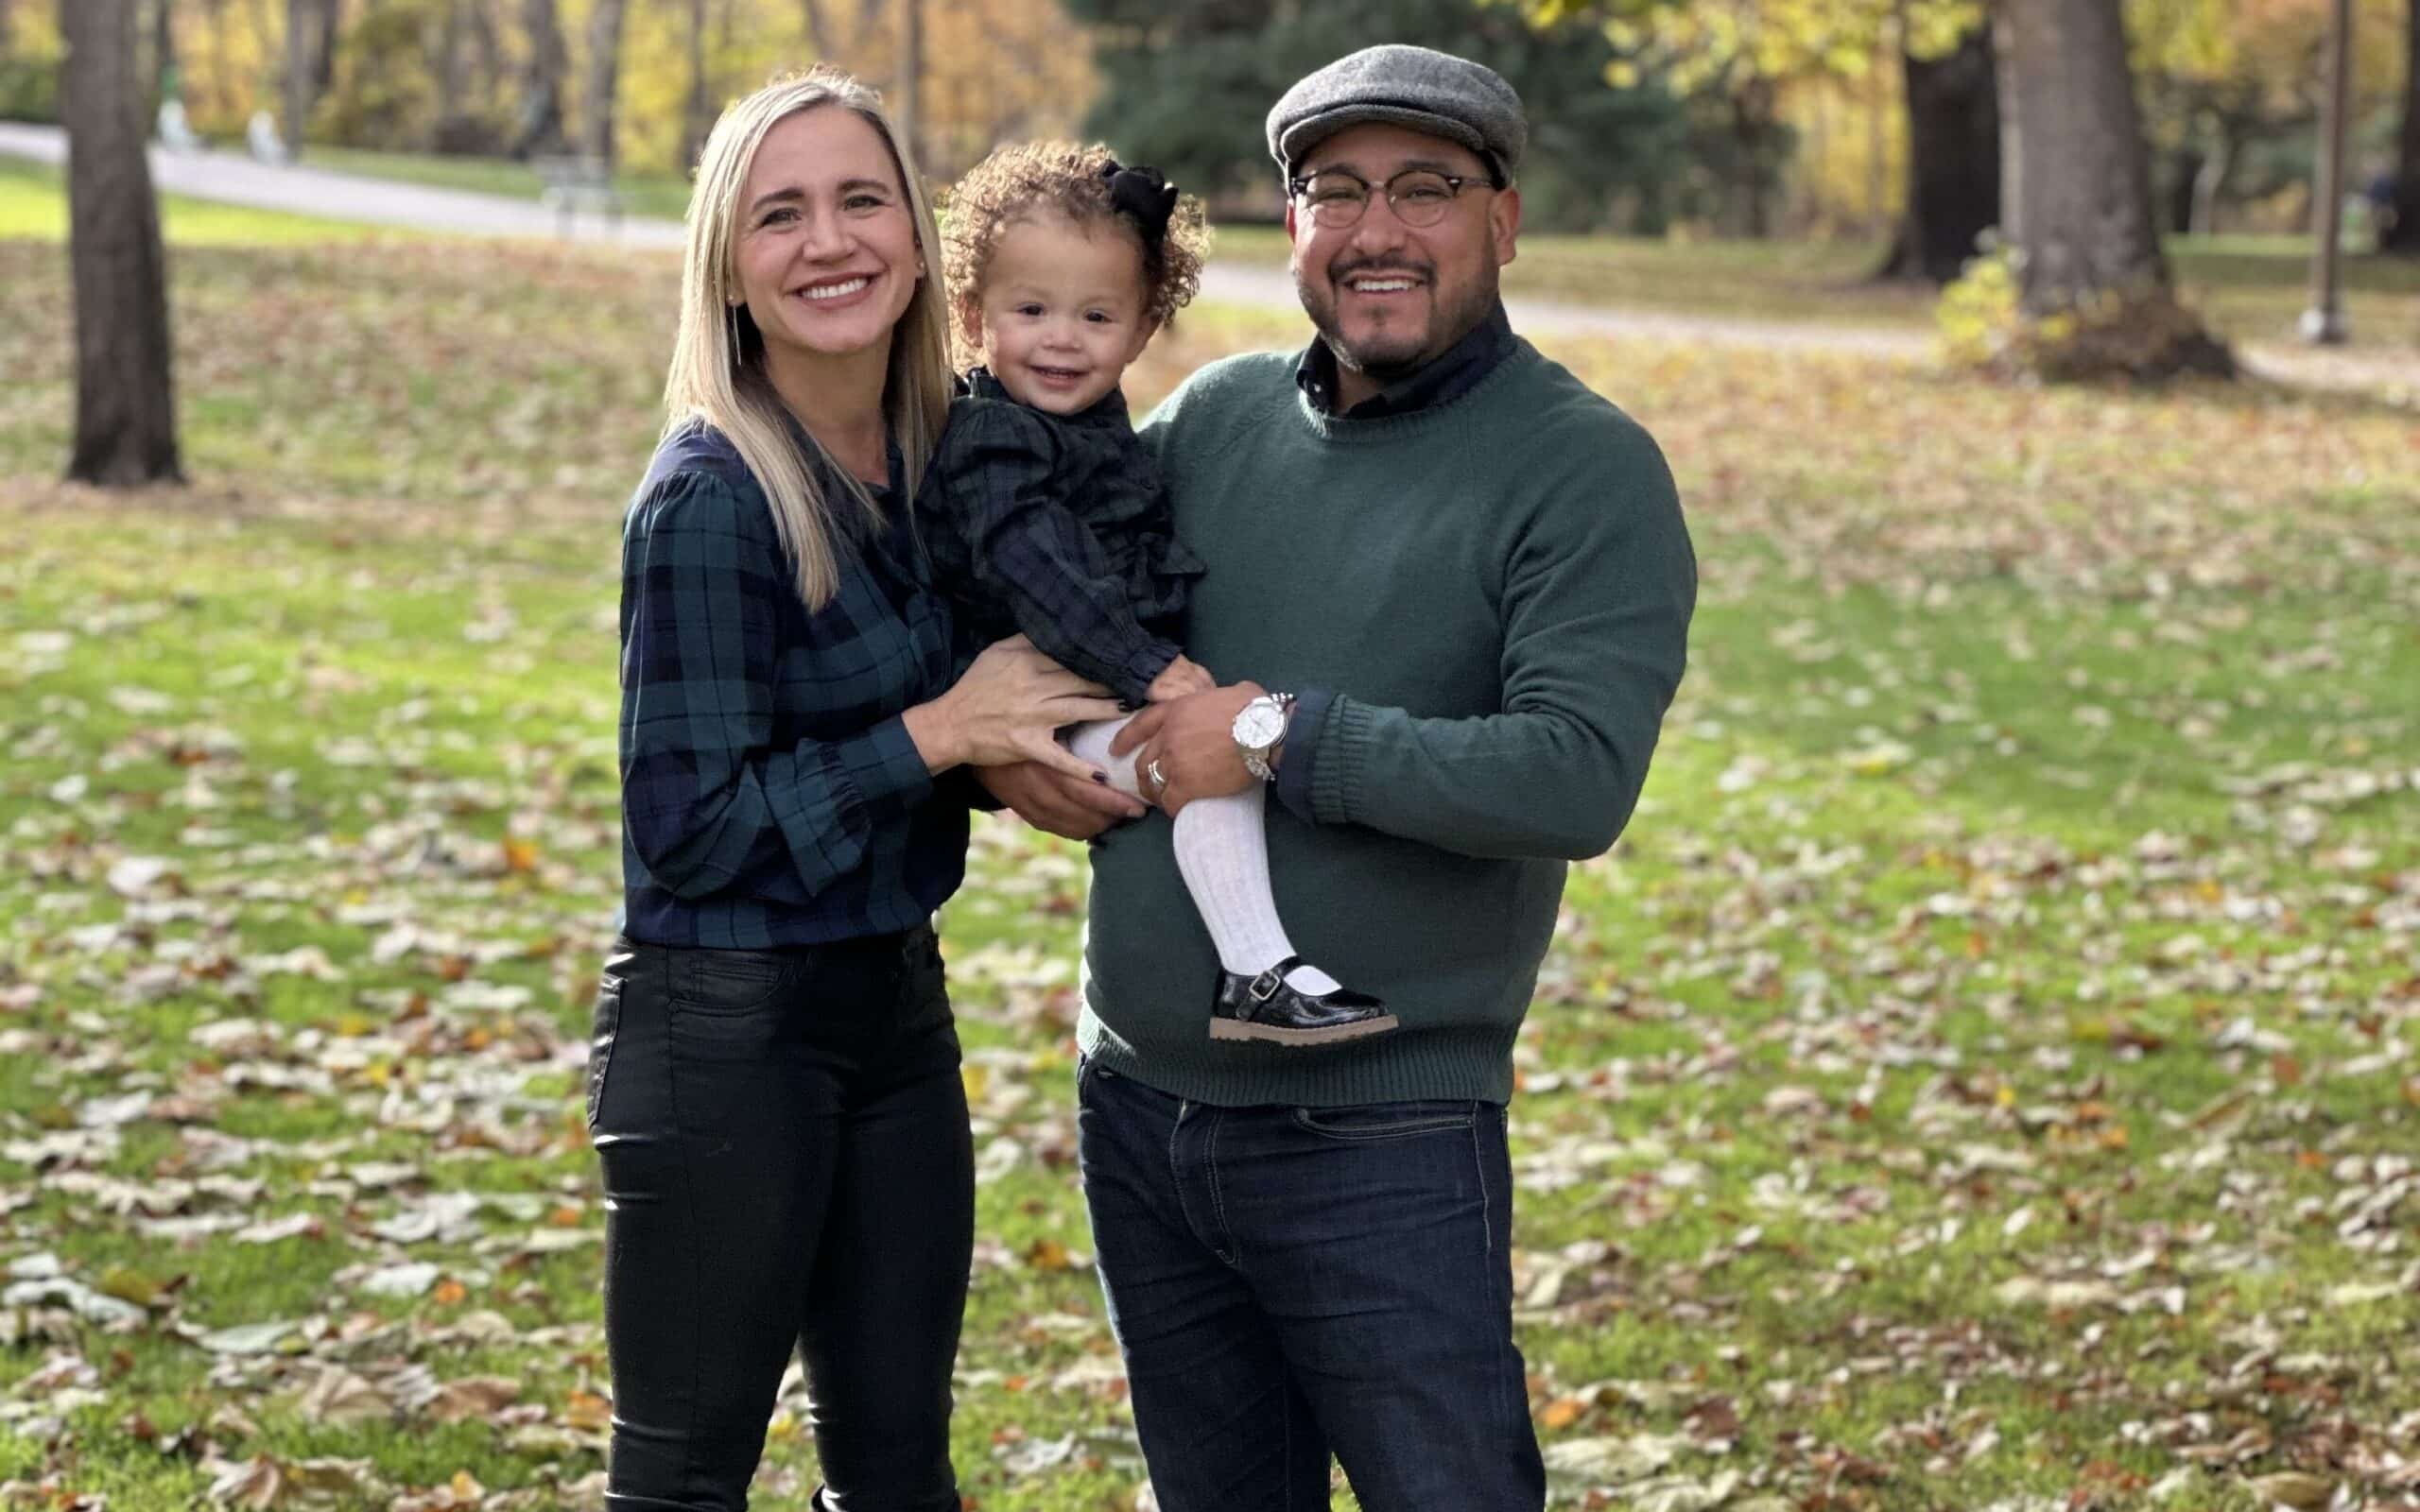 Shows our provider Erin Renak, PA-C with her husband and  young daughter posing together and smiling in a field with leaves and trees